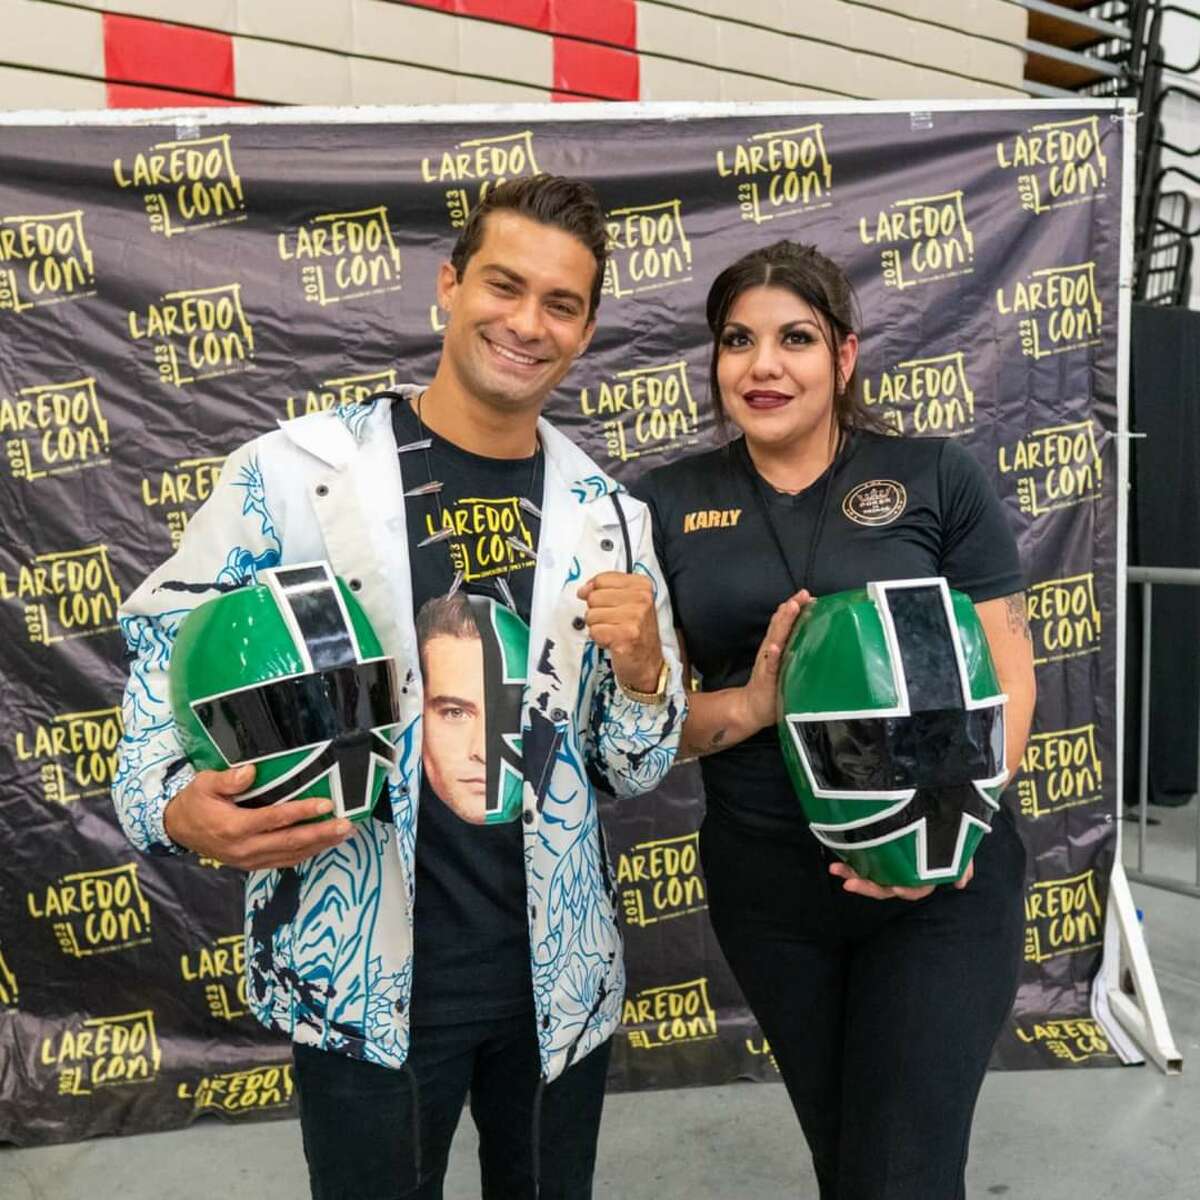 Laredo Con is a convention held in Nuevo Laredo that helps present various artists from the international film and television scene. Prior to this announcement, Laredo Con presented Nuevo Laredoans with the meet and greet with Hector David Jr., who played the green Power Ranger in the show “Power Rangers Samurai”, in their first-ever type of event done in the city.